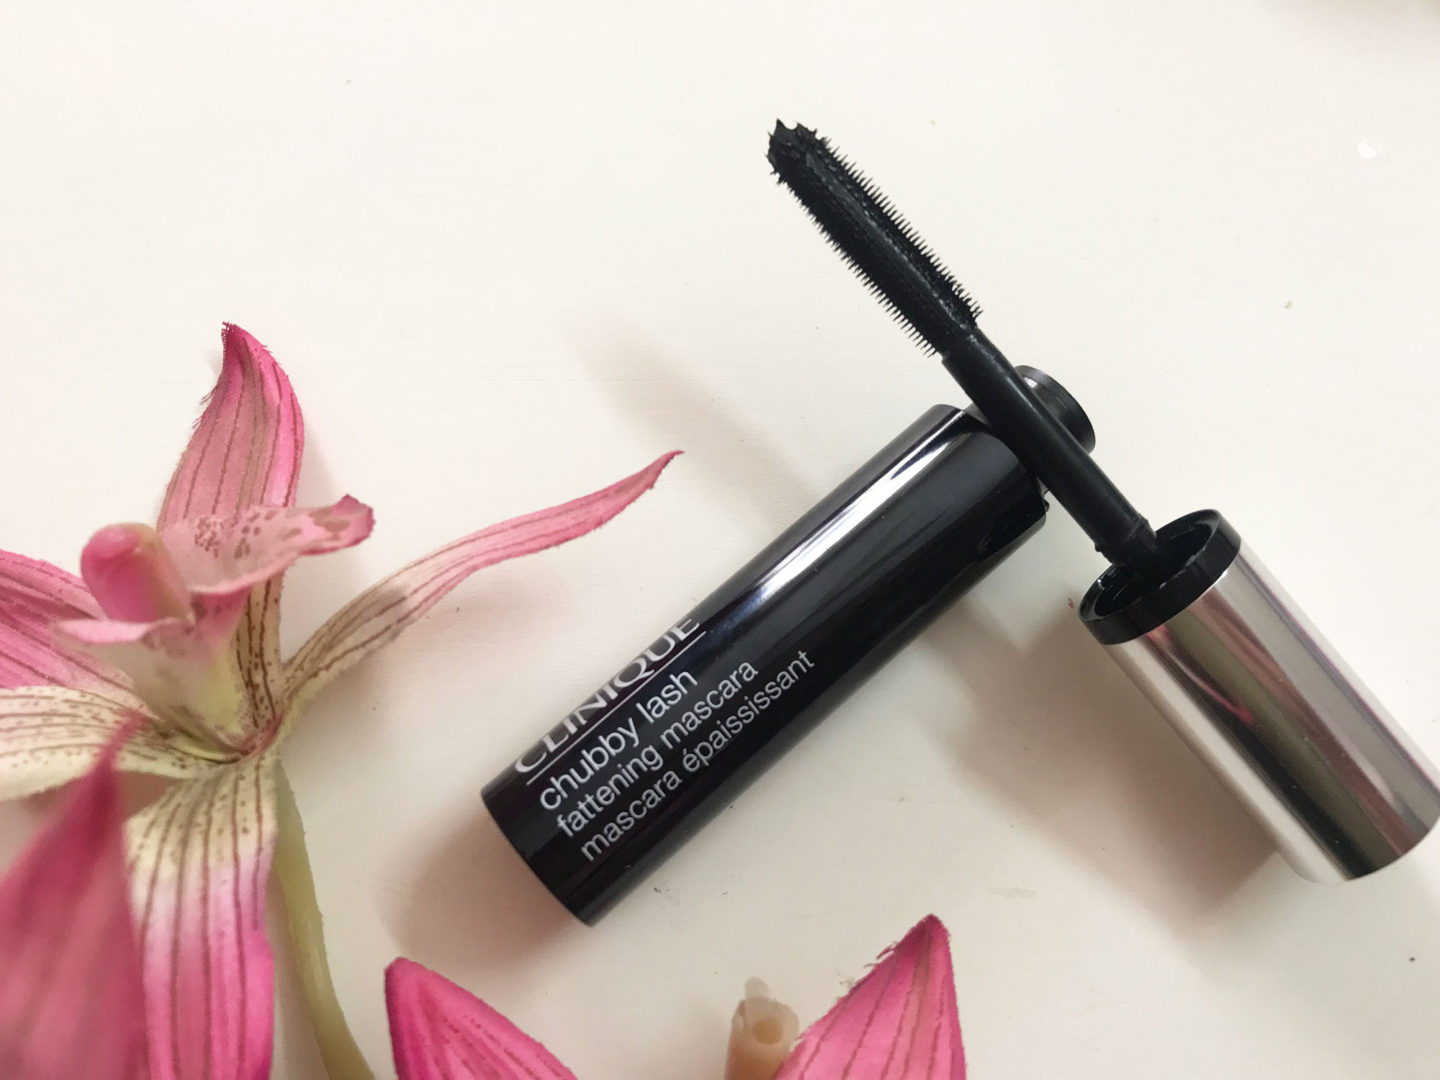 Clinique Chubby Lash Fattening Mascara Review packing